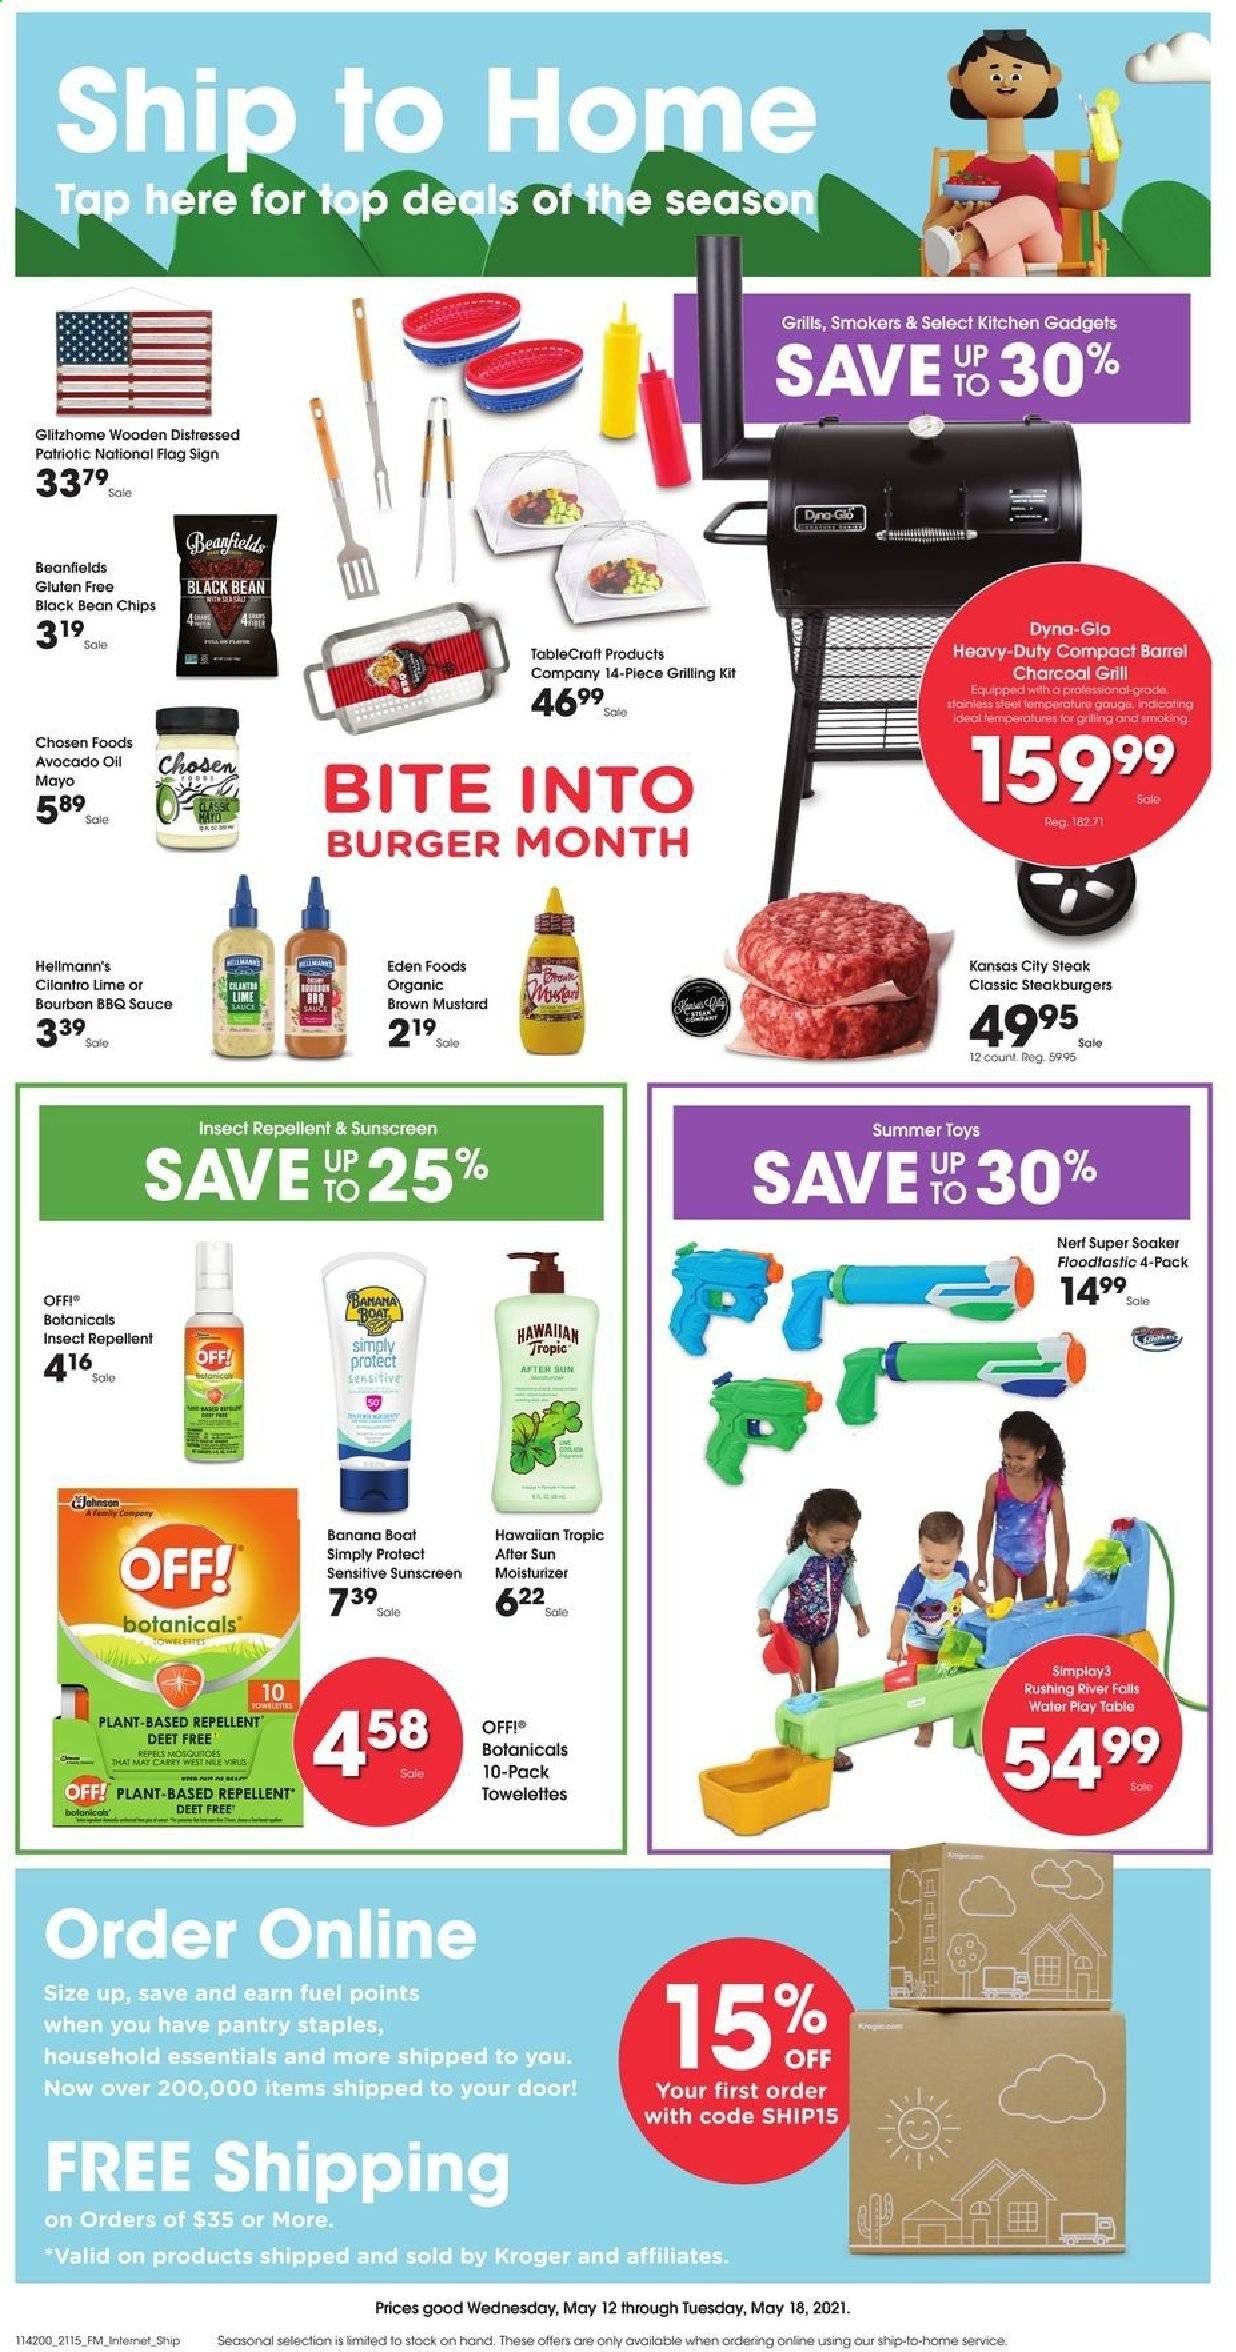 thumbnail - Smith's Flyer - 05/12/2021 - 05/18/2021 - Sales products - hamburger, sauce, mayonnaise, Hellmann’s, chips, cilantro, BBQ sauce, mustard, avocado oil, oil, steak, towelette, moisturizer, repellent, grill. Page 1.